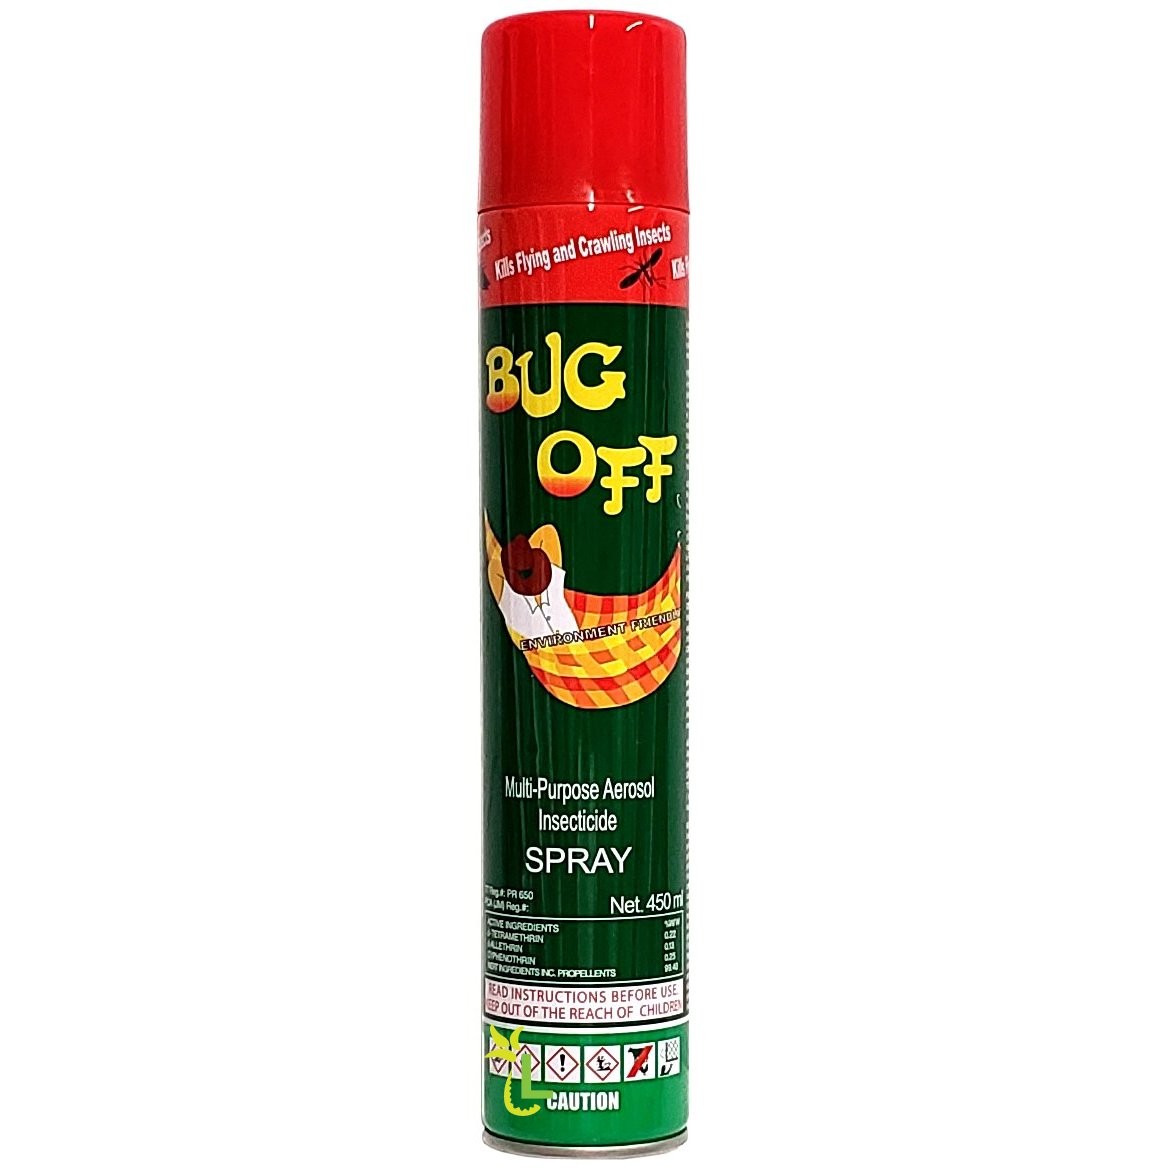 BUG OFF INSECT SPRAY 450ml